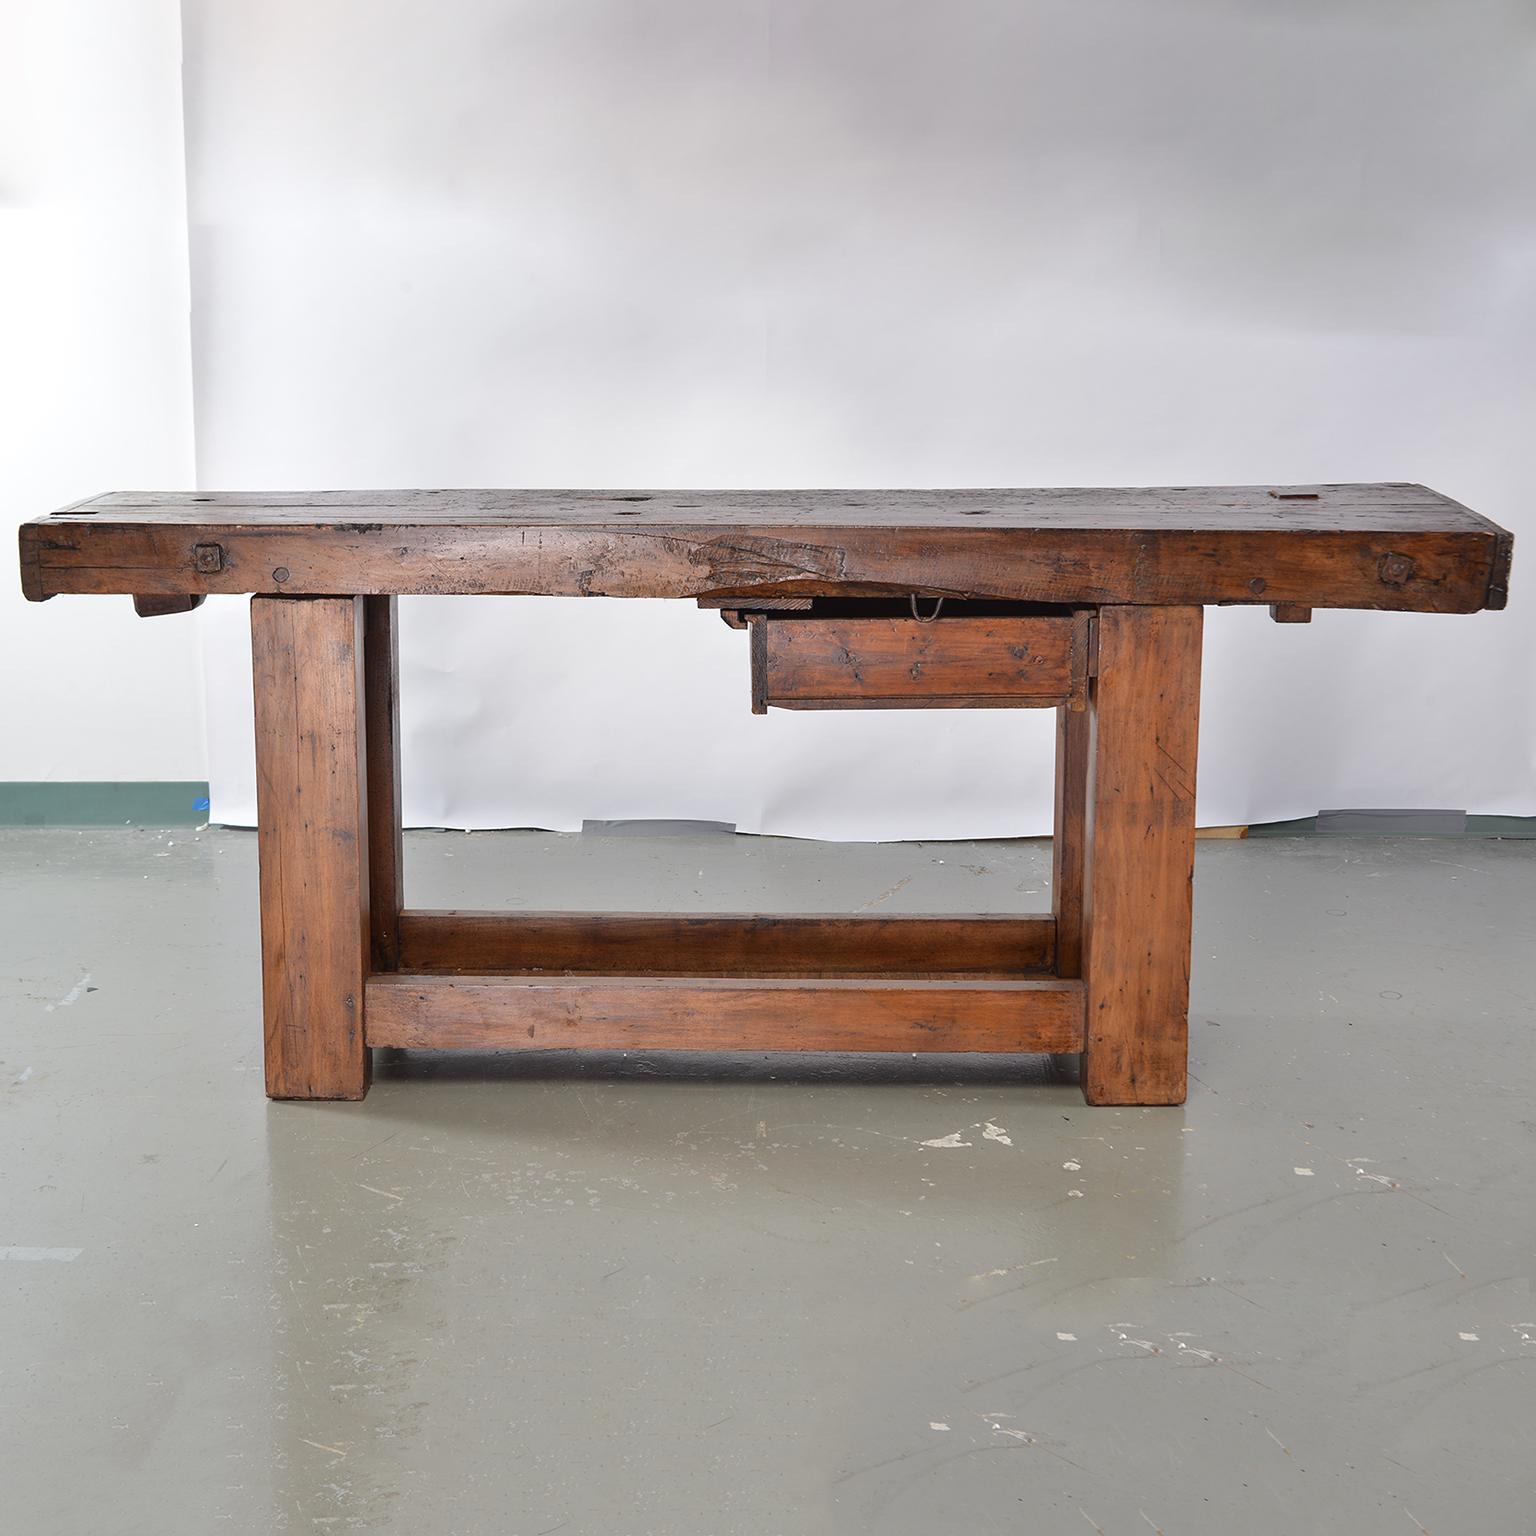 French wooden work bench table, circa 1860s. Long, narrow and very sturdy, this makes a great console or bar table. Bench has two drawers one slightly off-center with dividers, the other a very small drawer at the end (for nails or screws). Lower